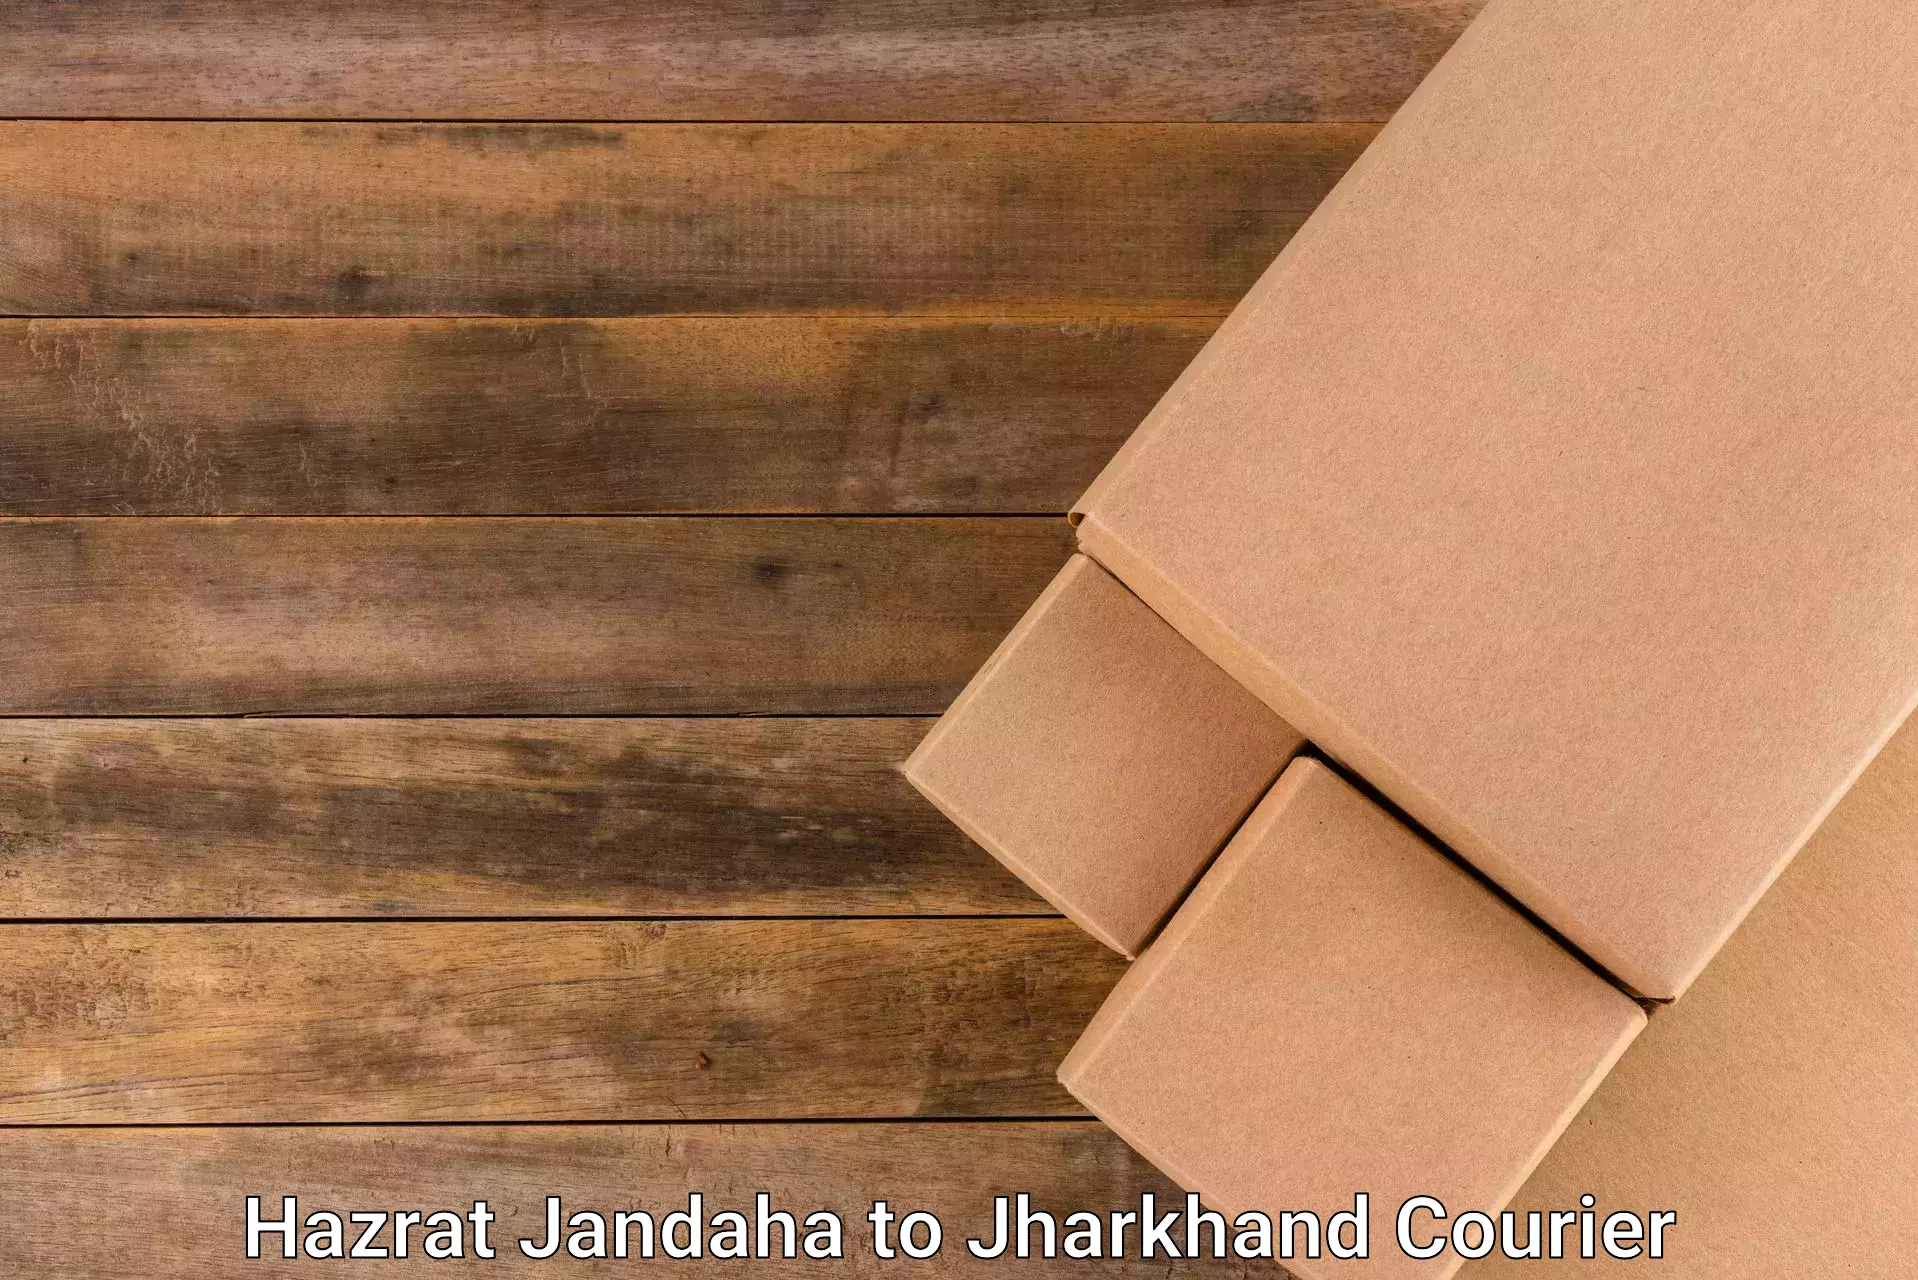 On-call courier service Hazrat Jandaha to IIT Dhanbad